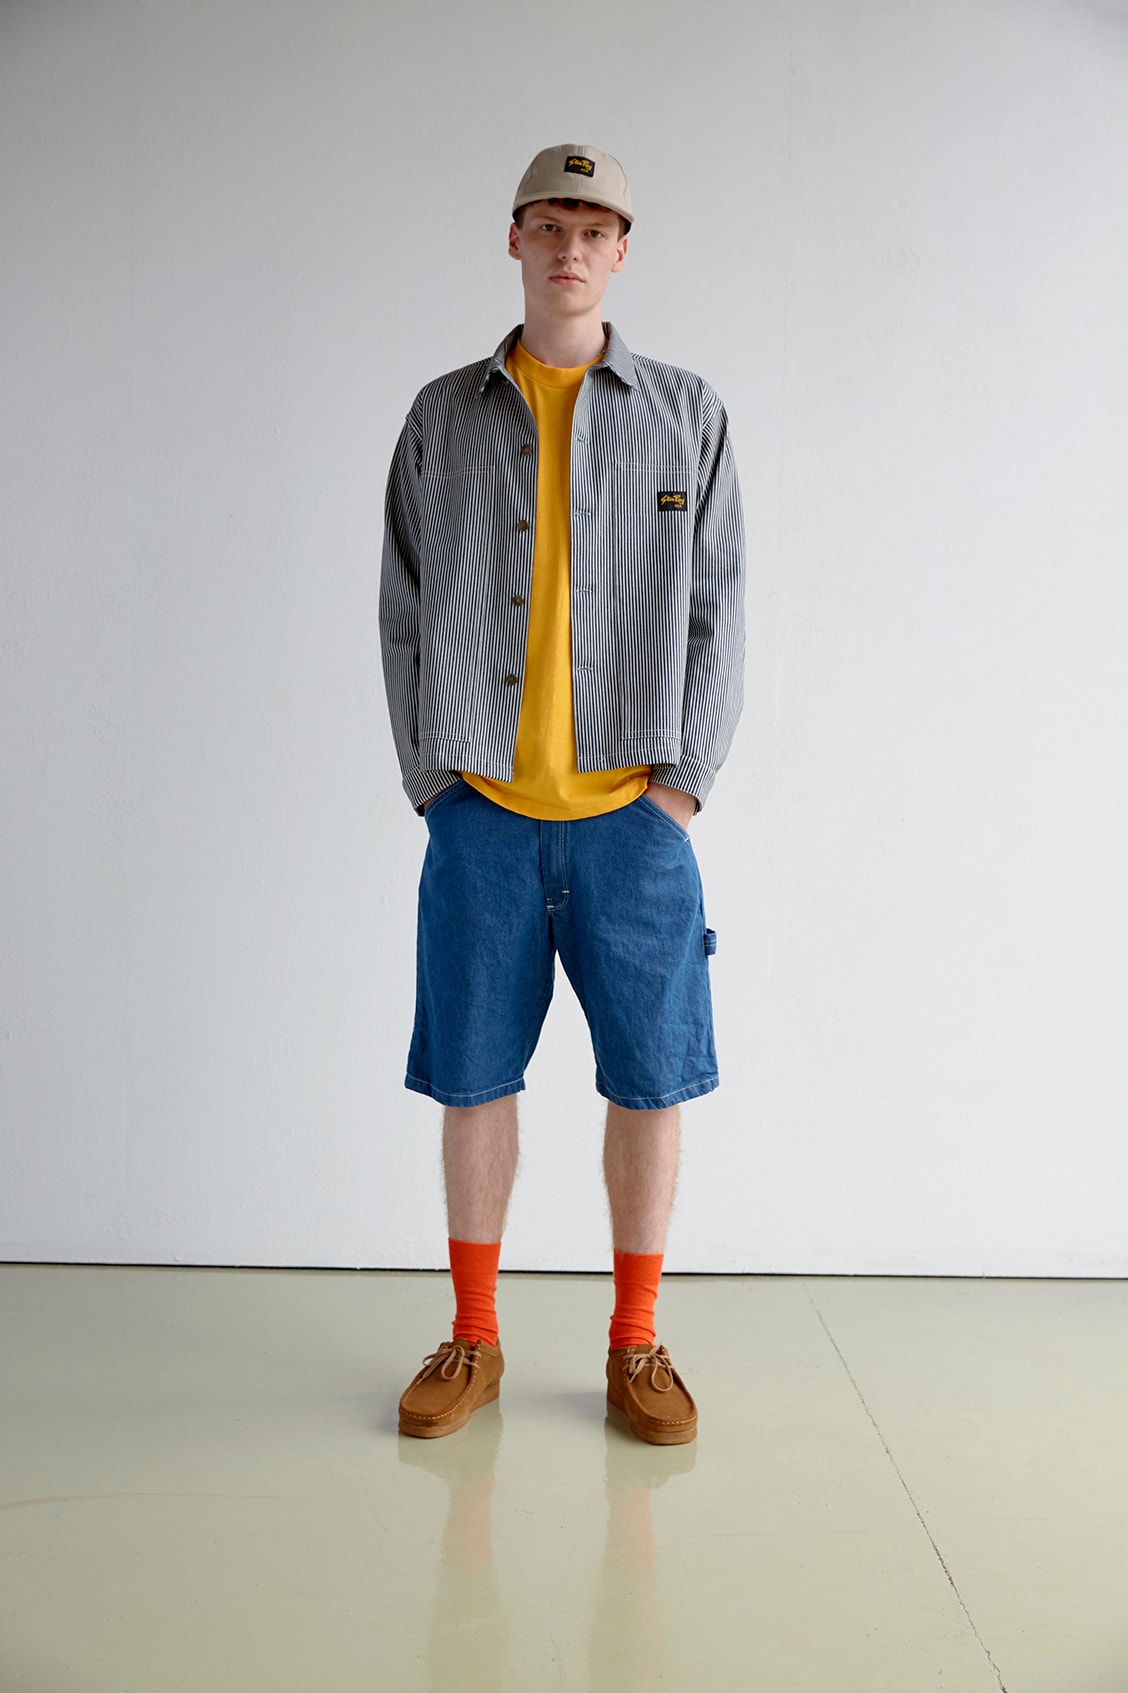 Stan Ray Spring/Summer 2019 Lookbook Collection Shirts Hoodies Jackets Tees T-Shirts Dungarees Overalls Jeans Trousers Pants Patagonia Miles Johnson